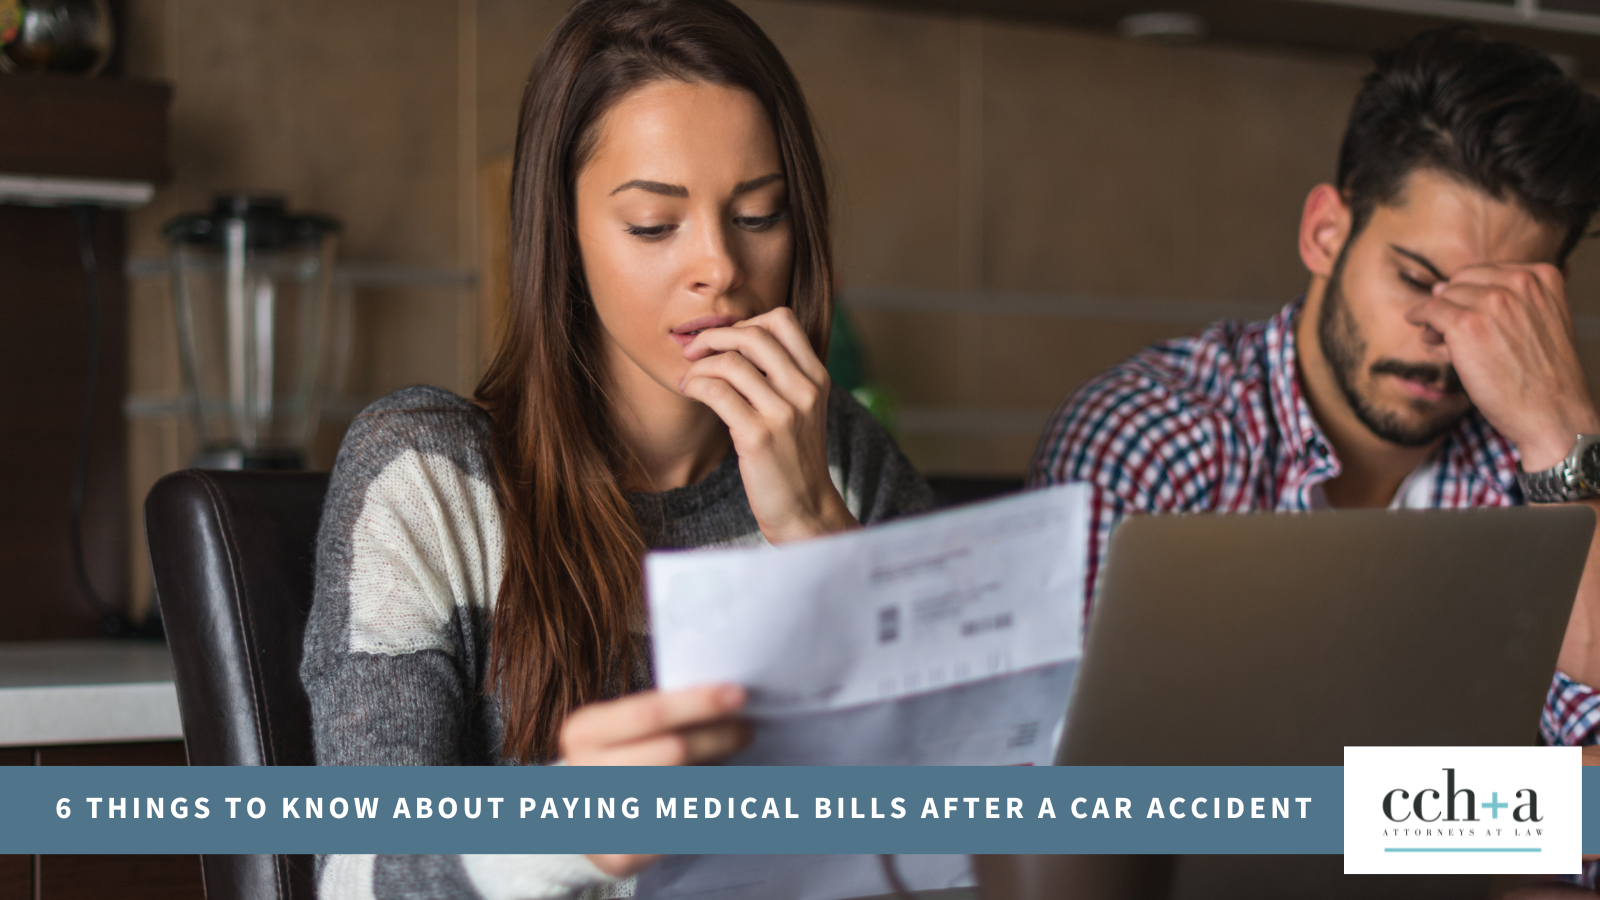 Paying Medical Bills After a Car Accident